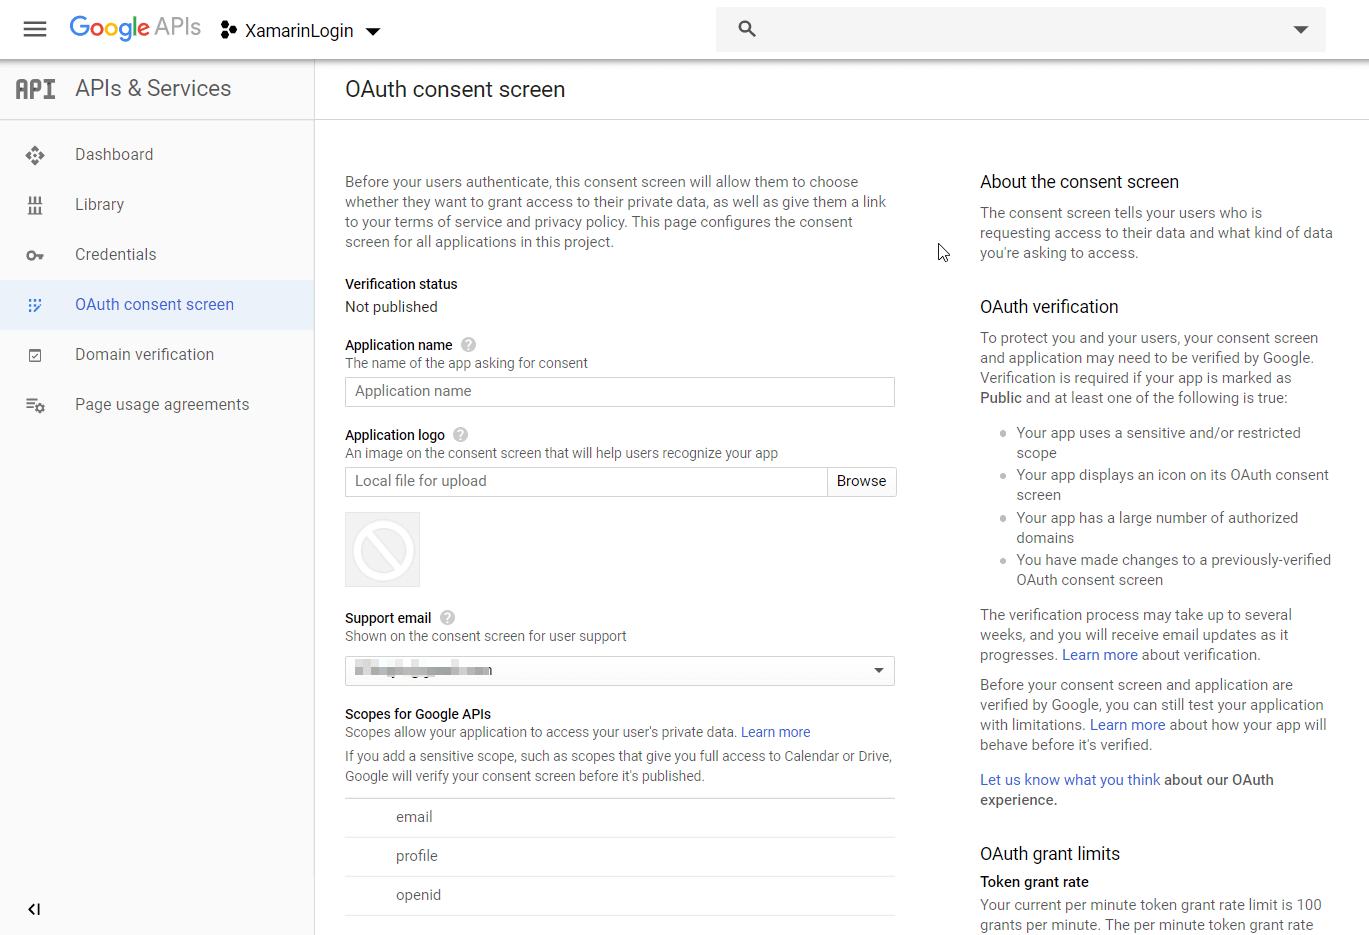 Filling details in OAuth consent screen